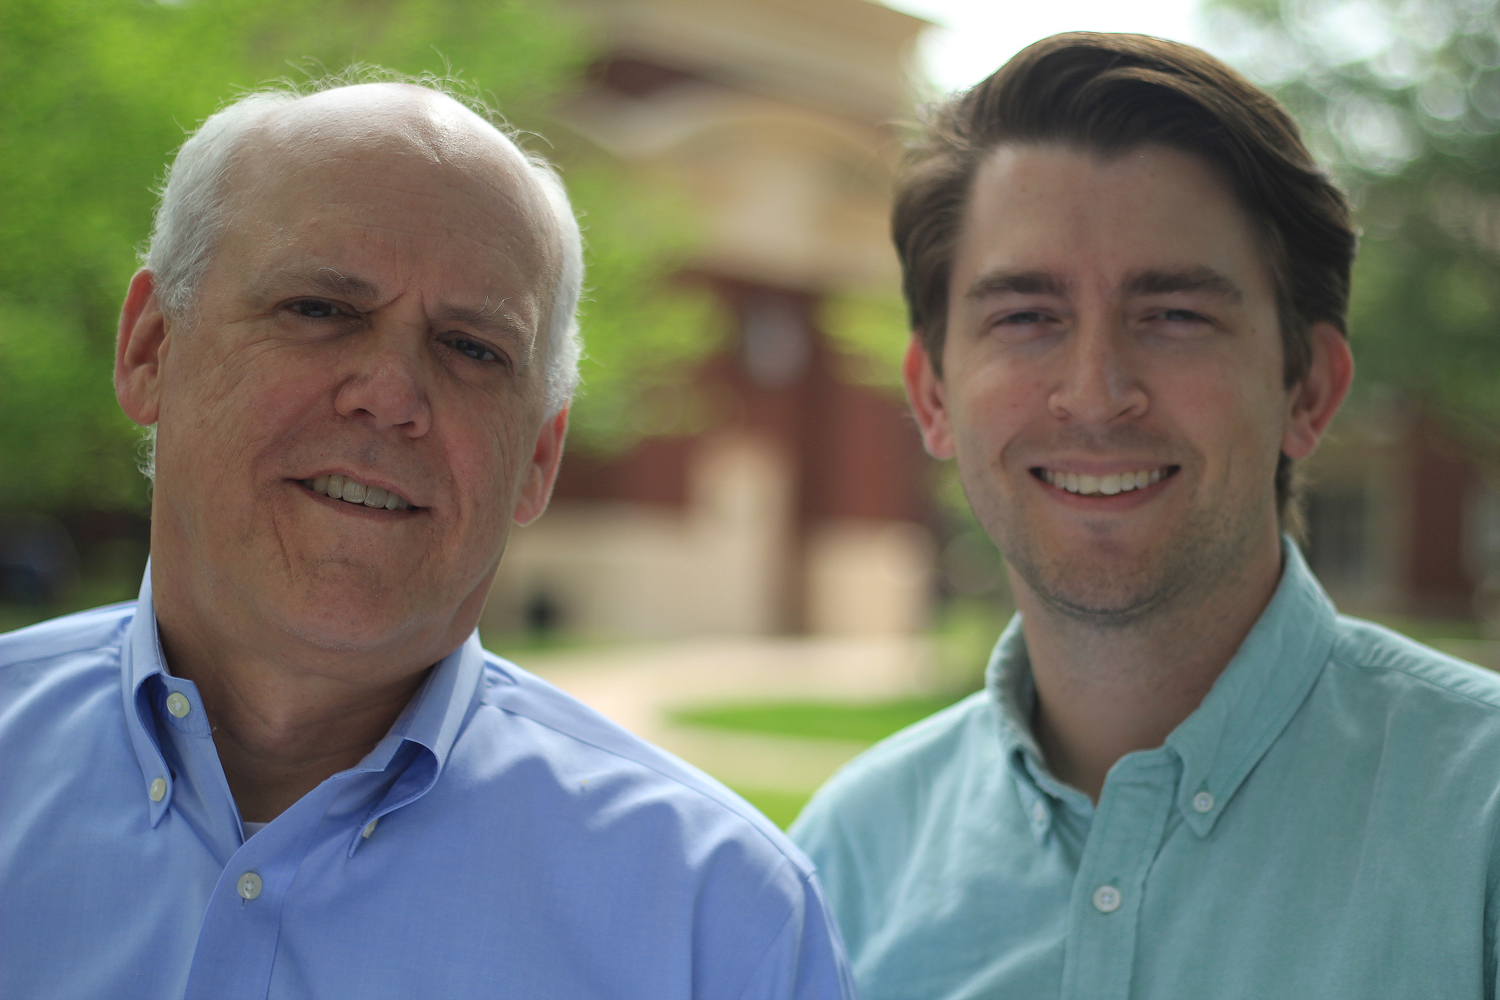 Bob Page and Joe Cornelius of the Knight School of Communication, Queens University of Charlotte, May 2016